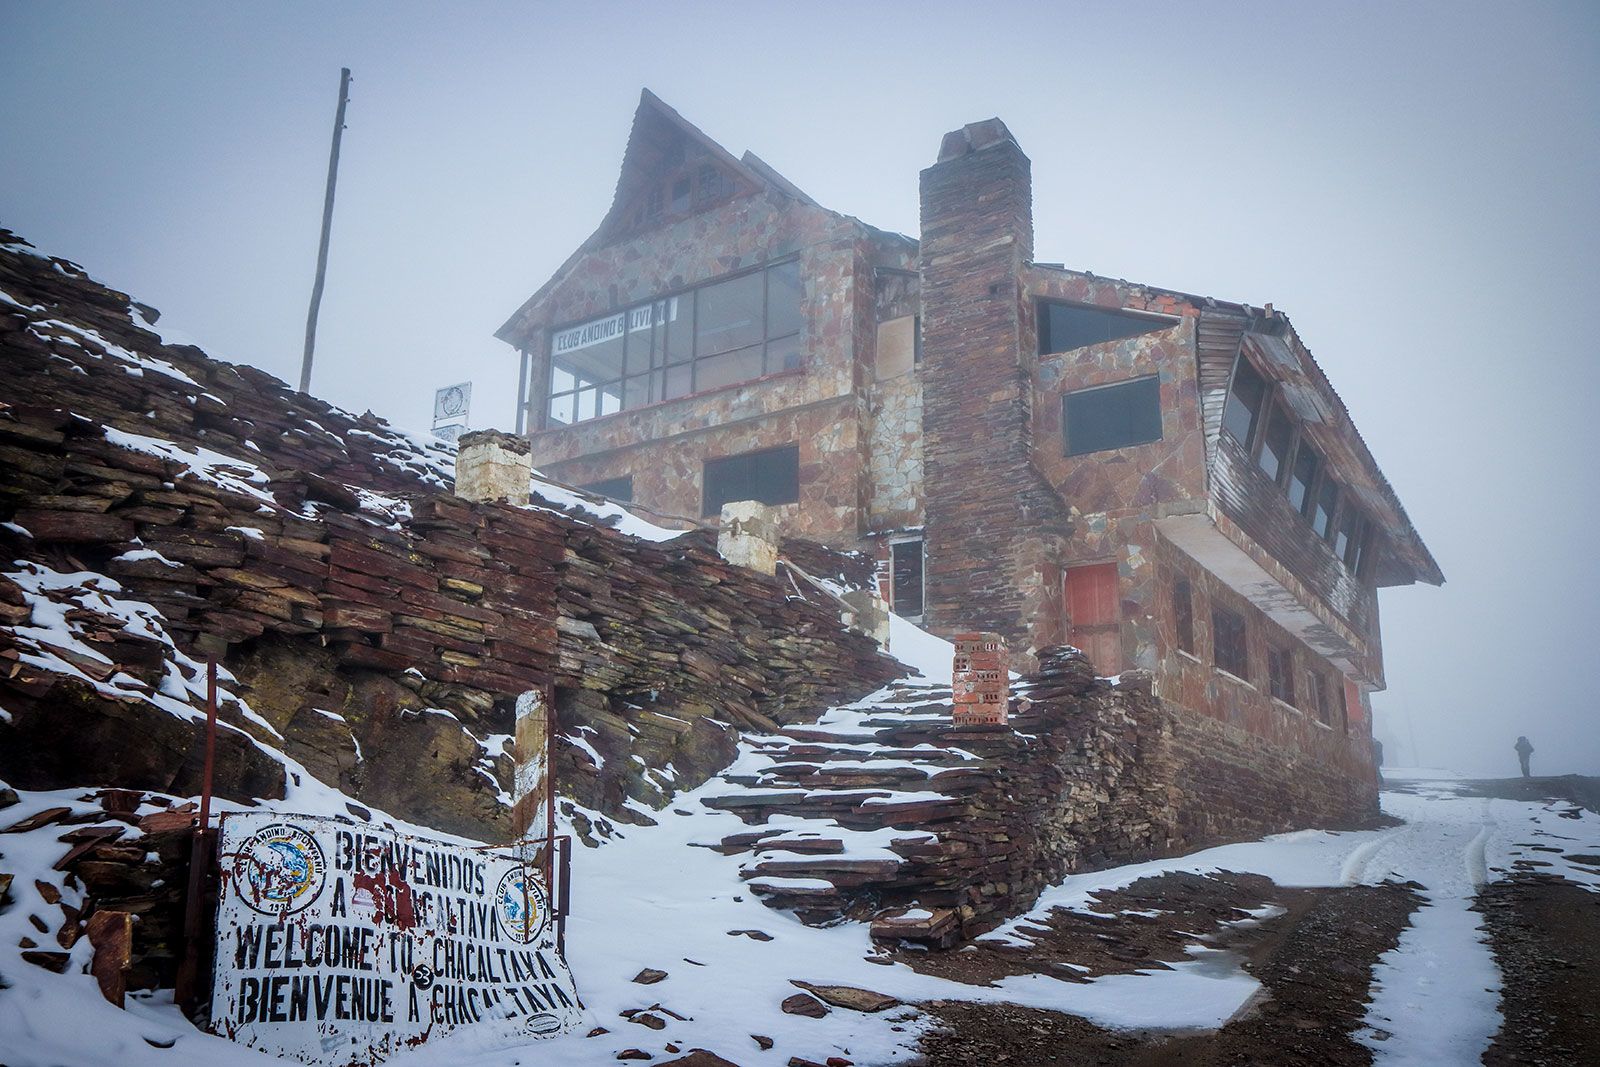 Travellers are flocking to these ghost towns and abandoned places - Lonely  Planet